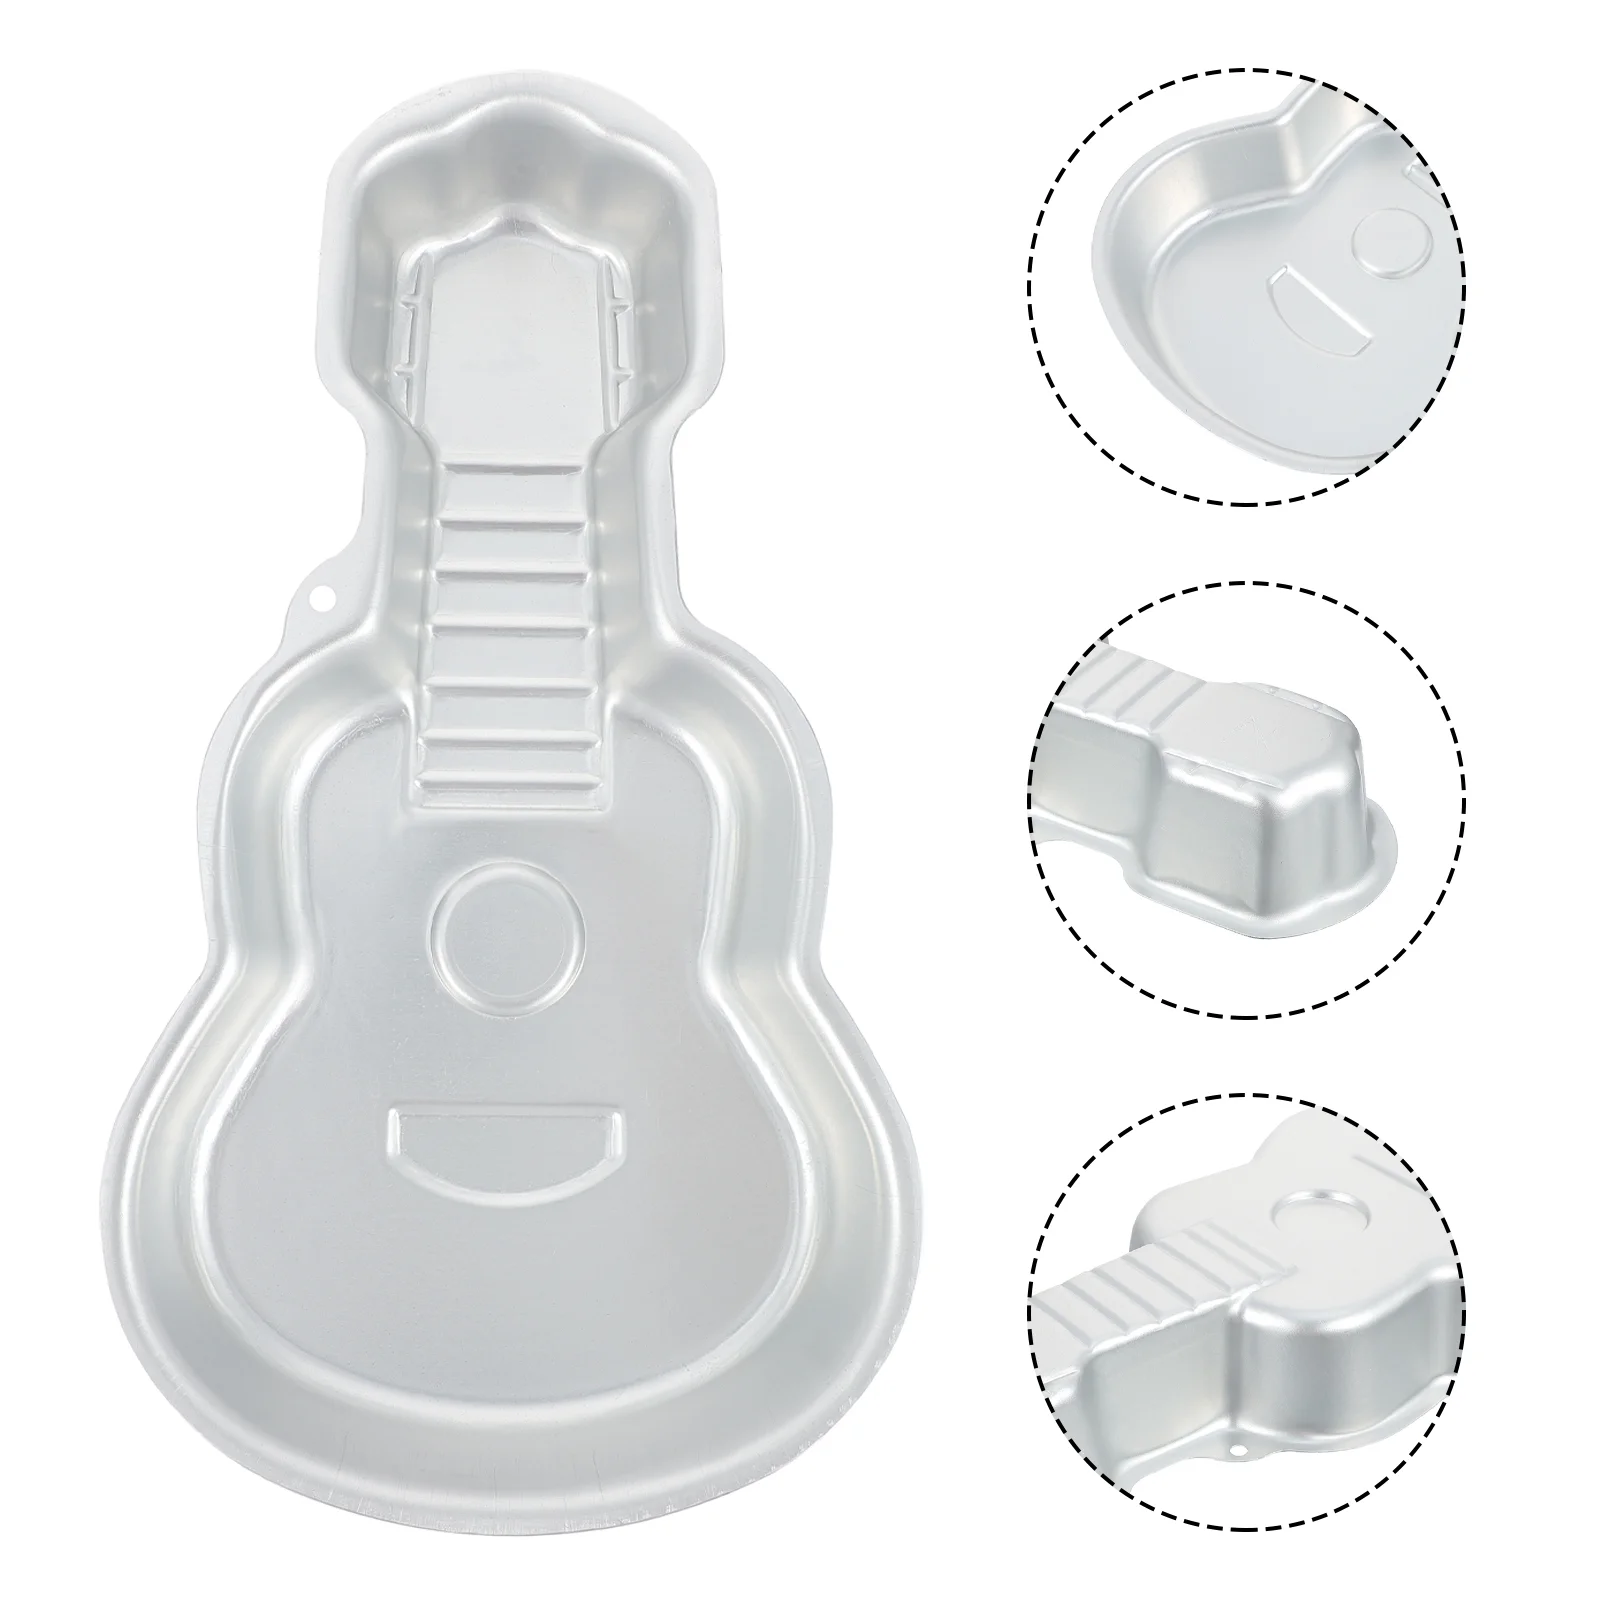 

Cake Baking Pan Guitar Mold Nonstick Tray Novelty Candy Molds Pudding Jelly Mould Christmas Pastry Pizza Bottom Removable Shape